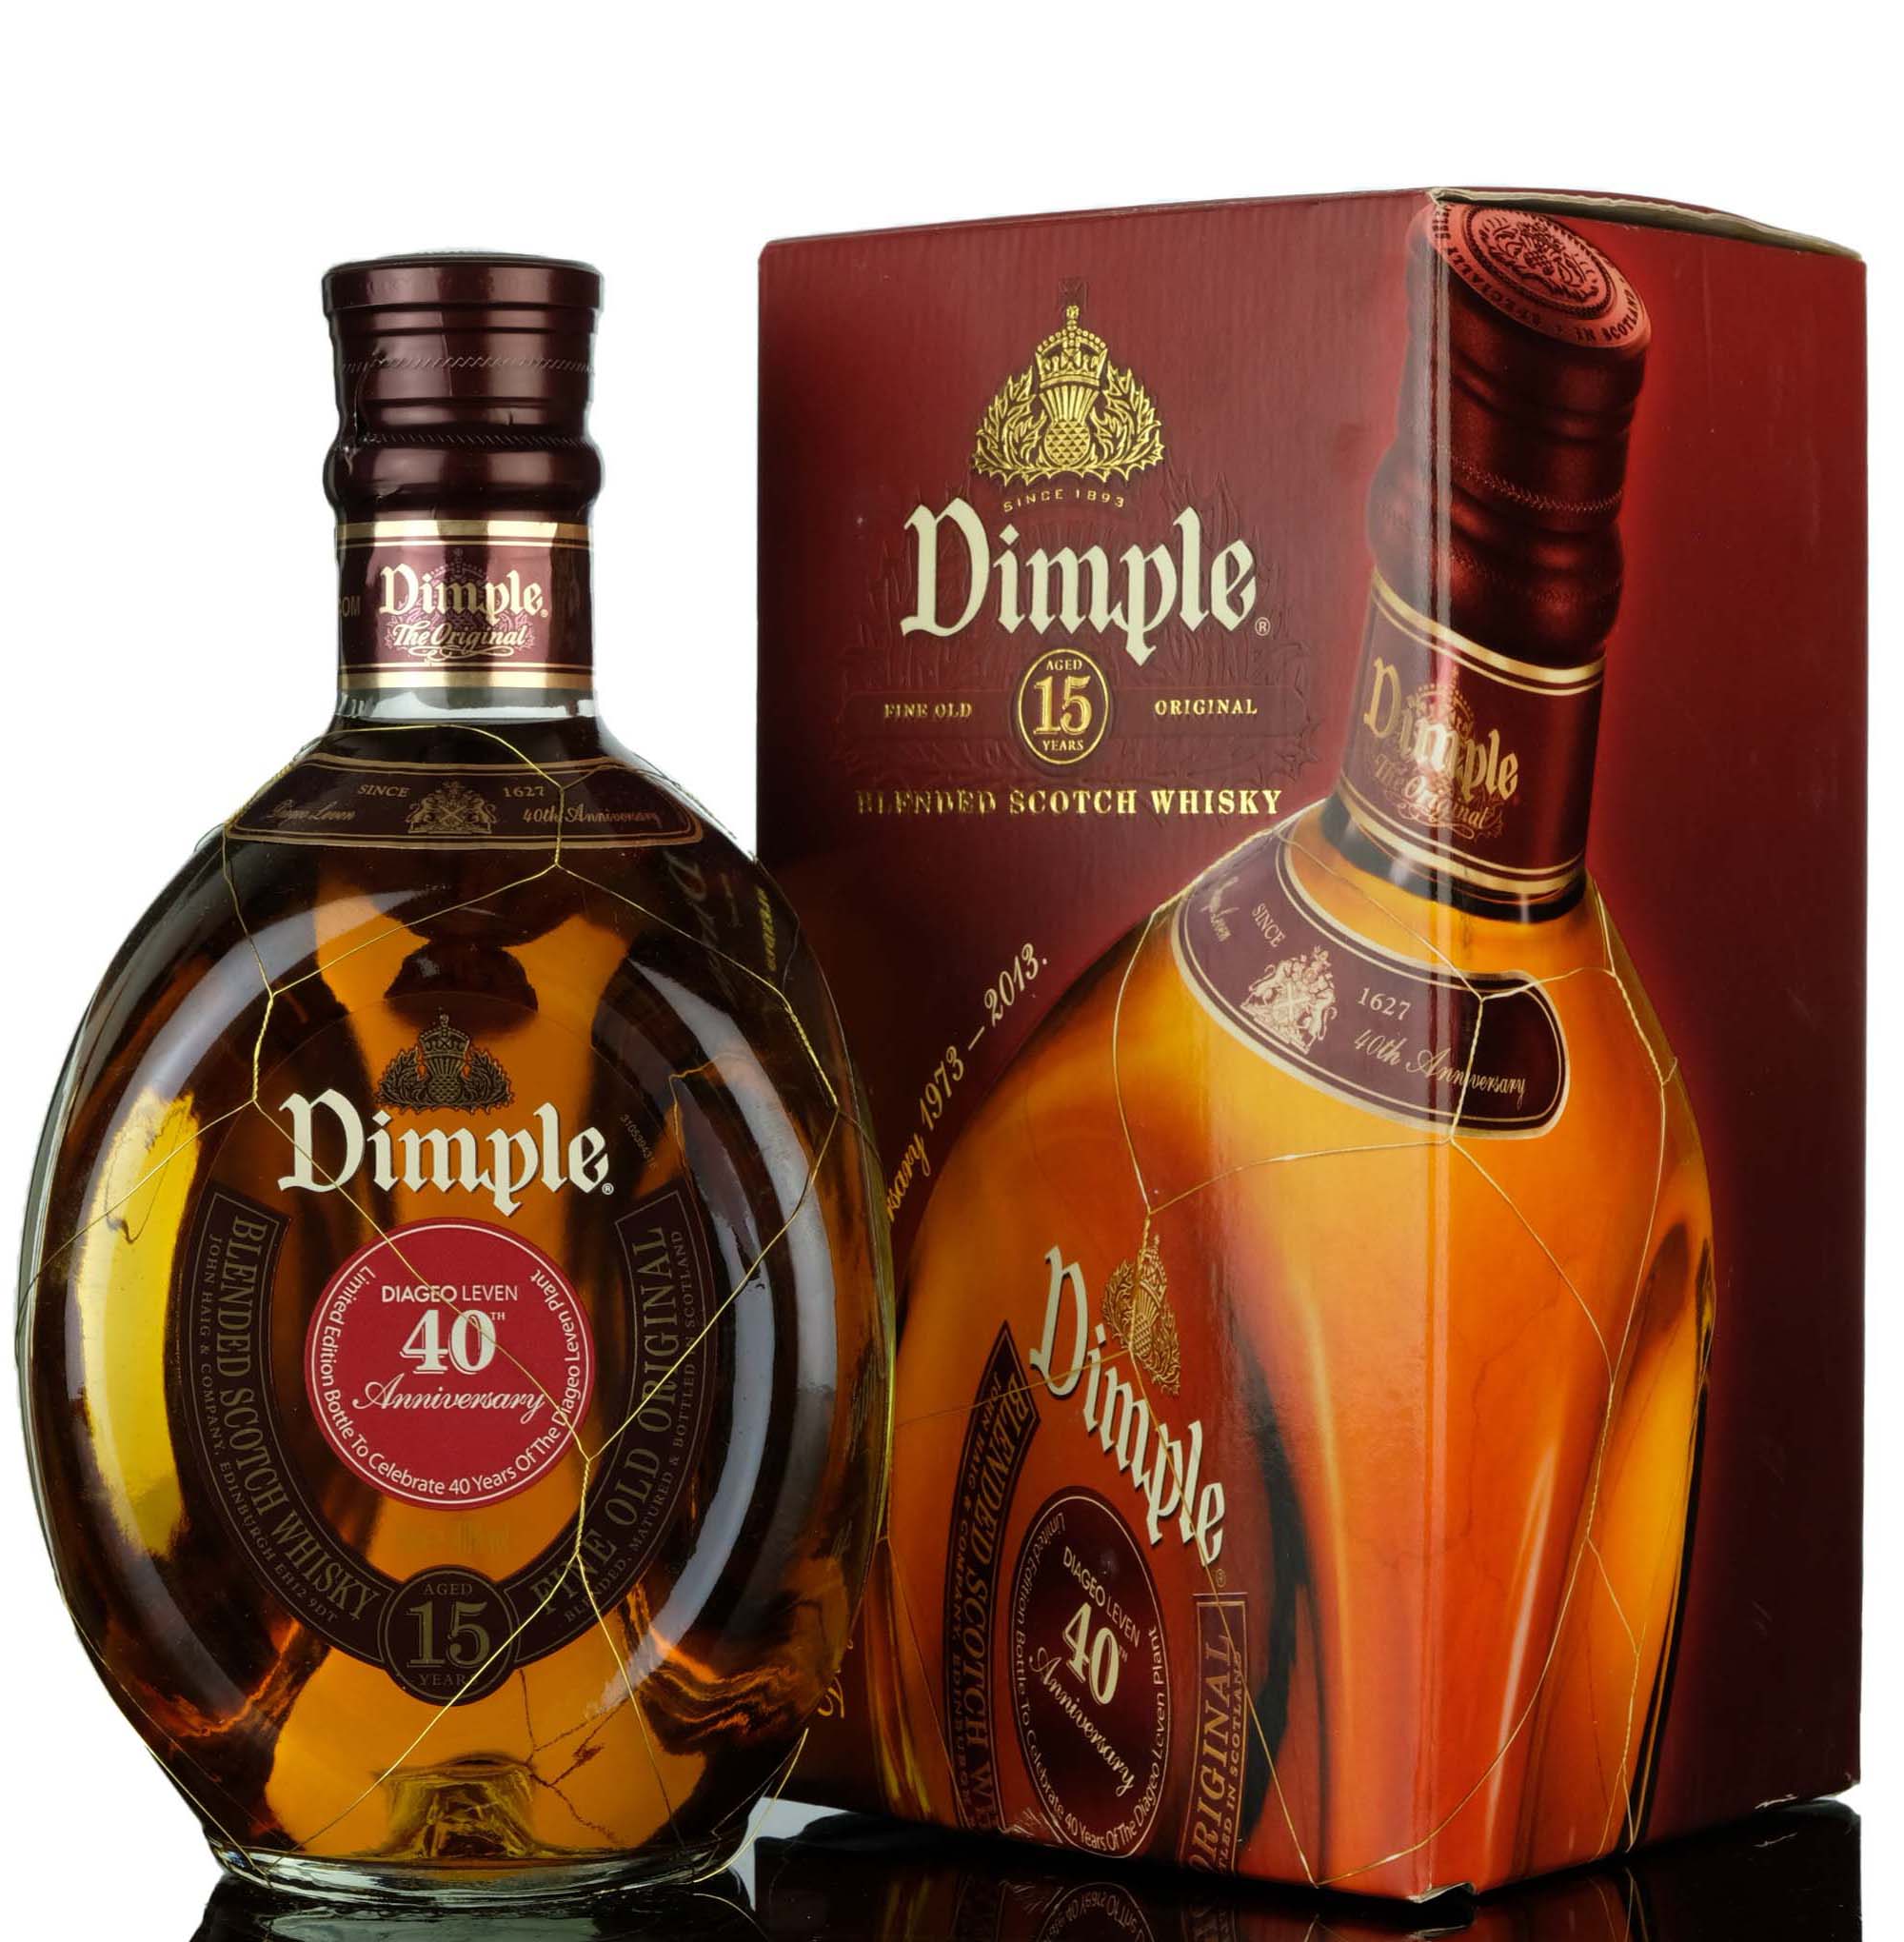 Dimple 15 Year Old - Fine Old Original - Diageo Leven 40th Anniversary 1973-2013